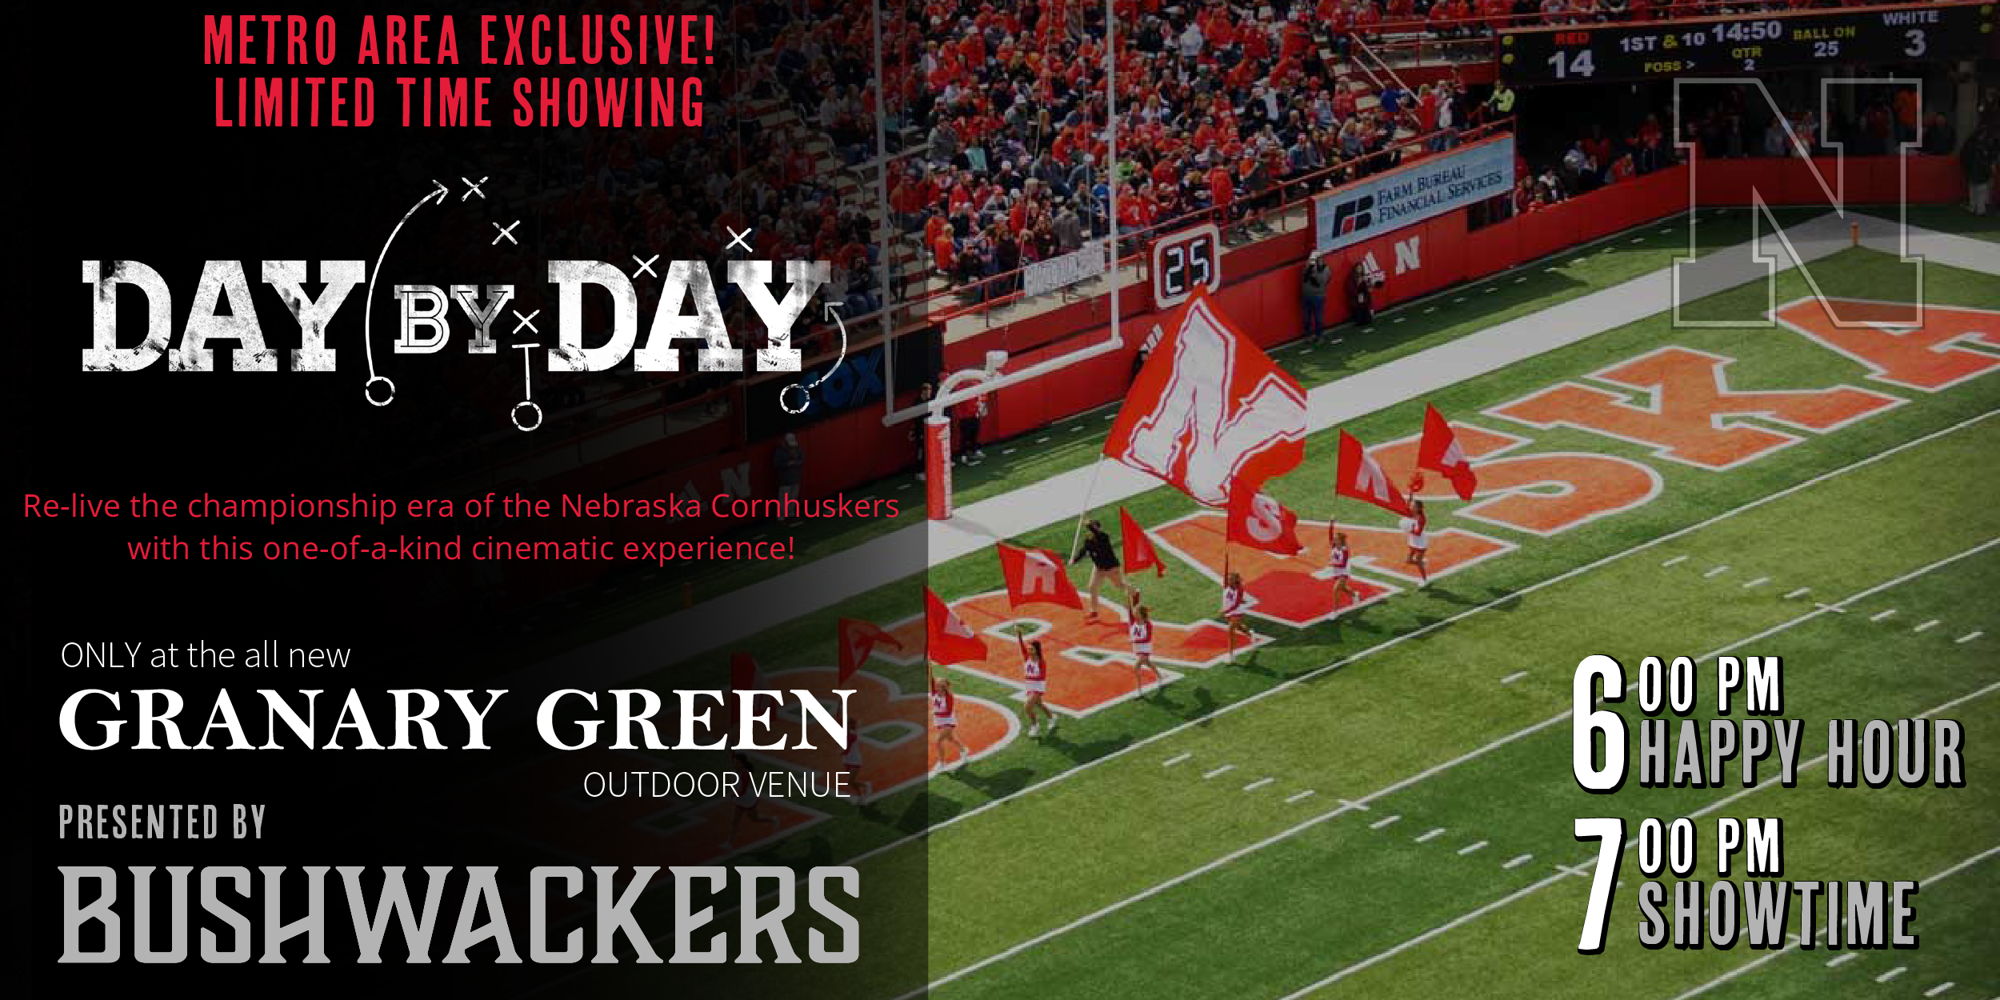 Week 6 of 8: Friday Night Football Film - Showing of "Day by Day" Husker Documentary (Part 1) promotional image